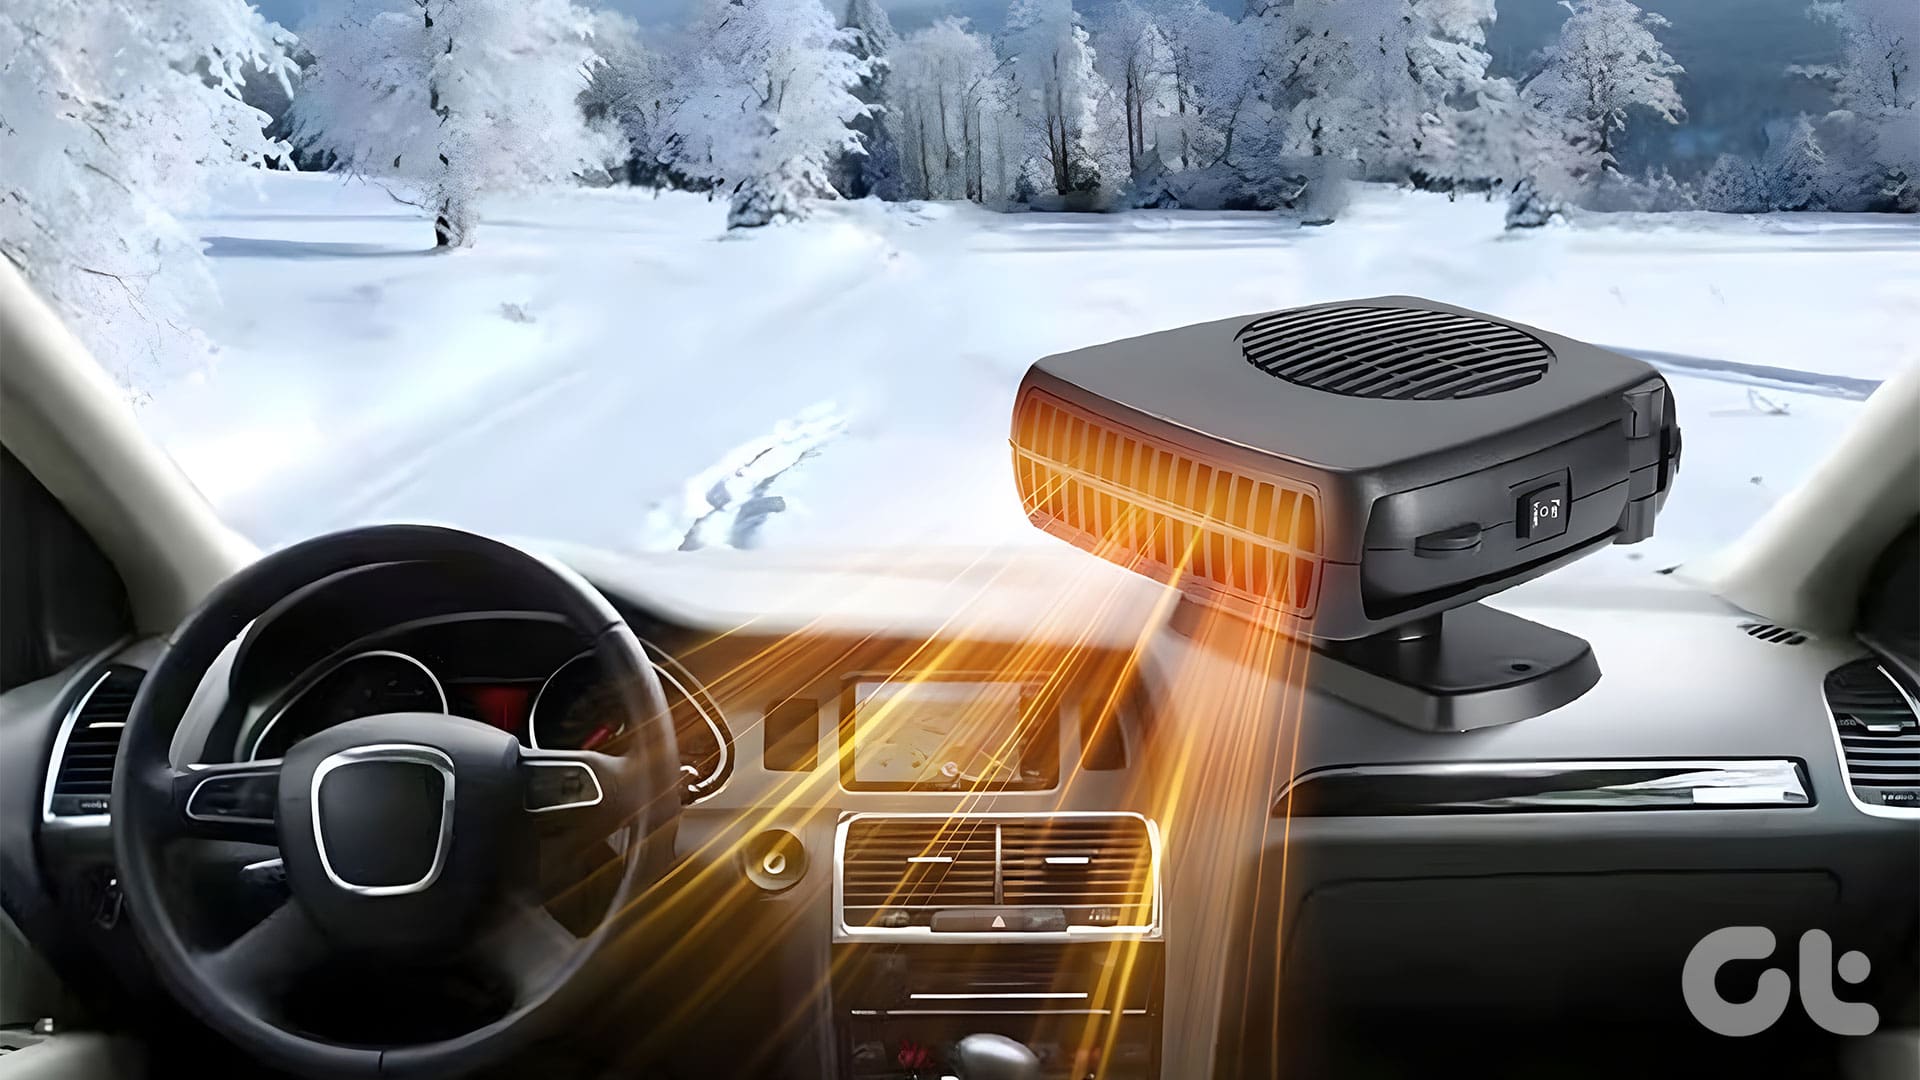 Portable Car Heater Anti-Fog Automobile Warmer Cooling Function